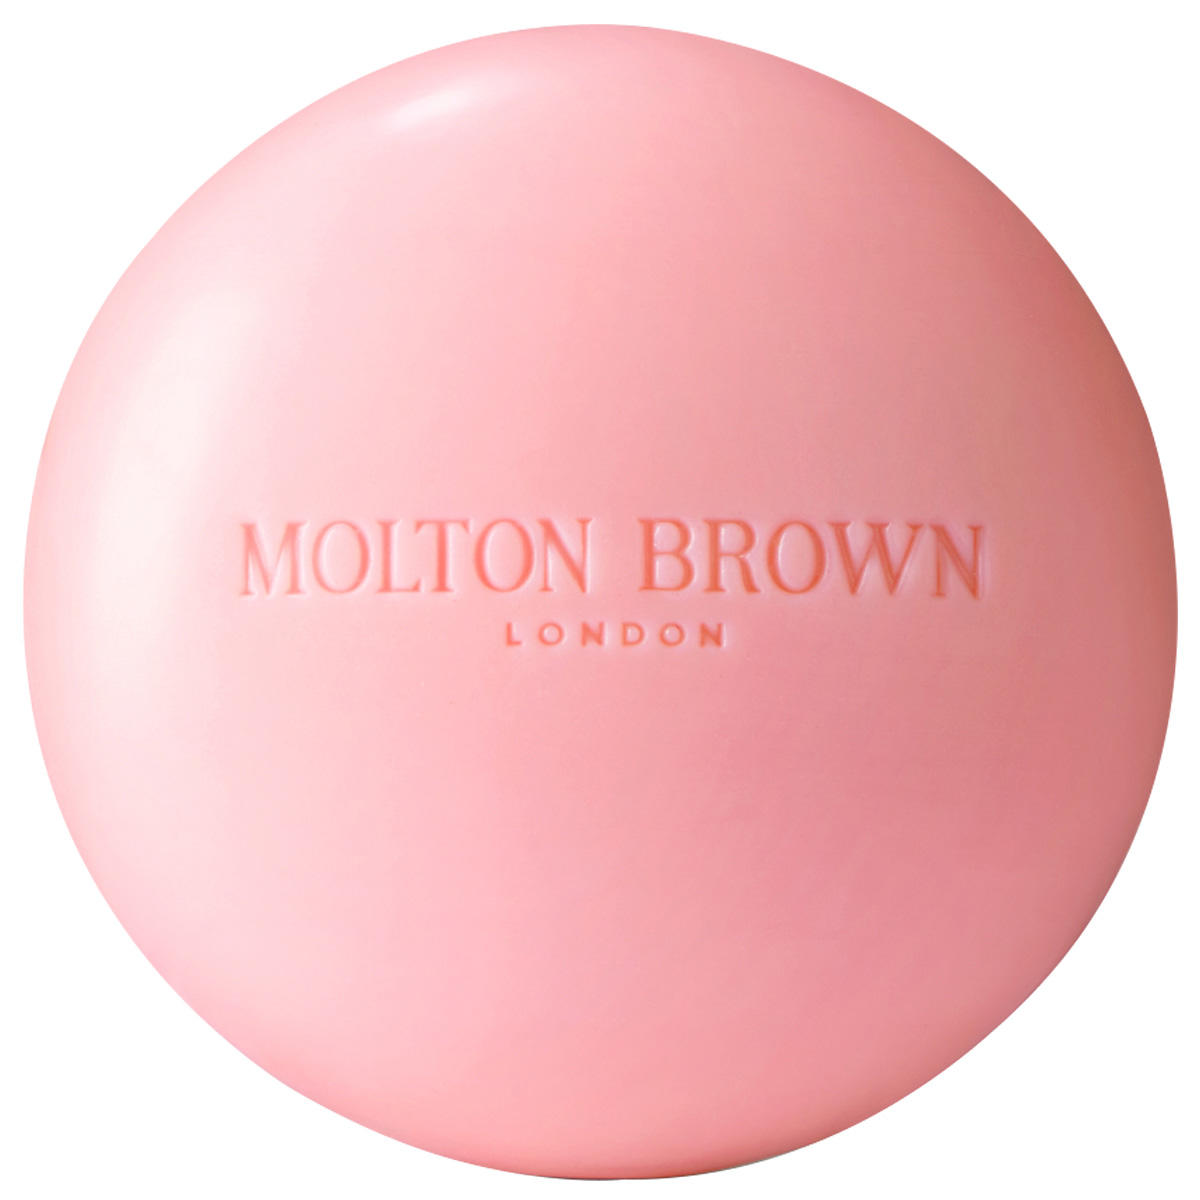 MOLTON BROWN Delicious Rhubarb & Rose Perfumed Soap 150 g - 1